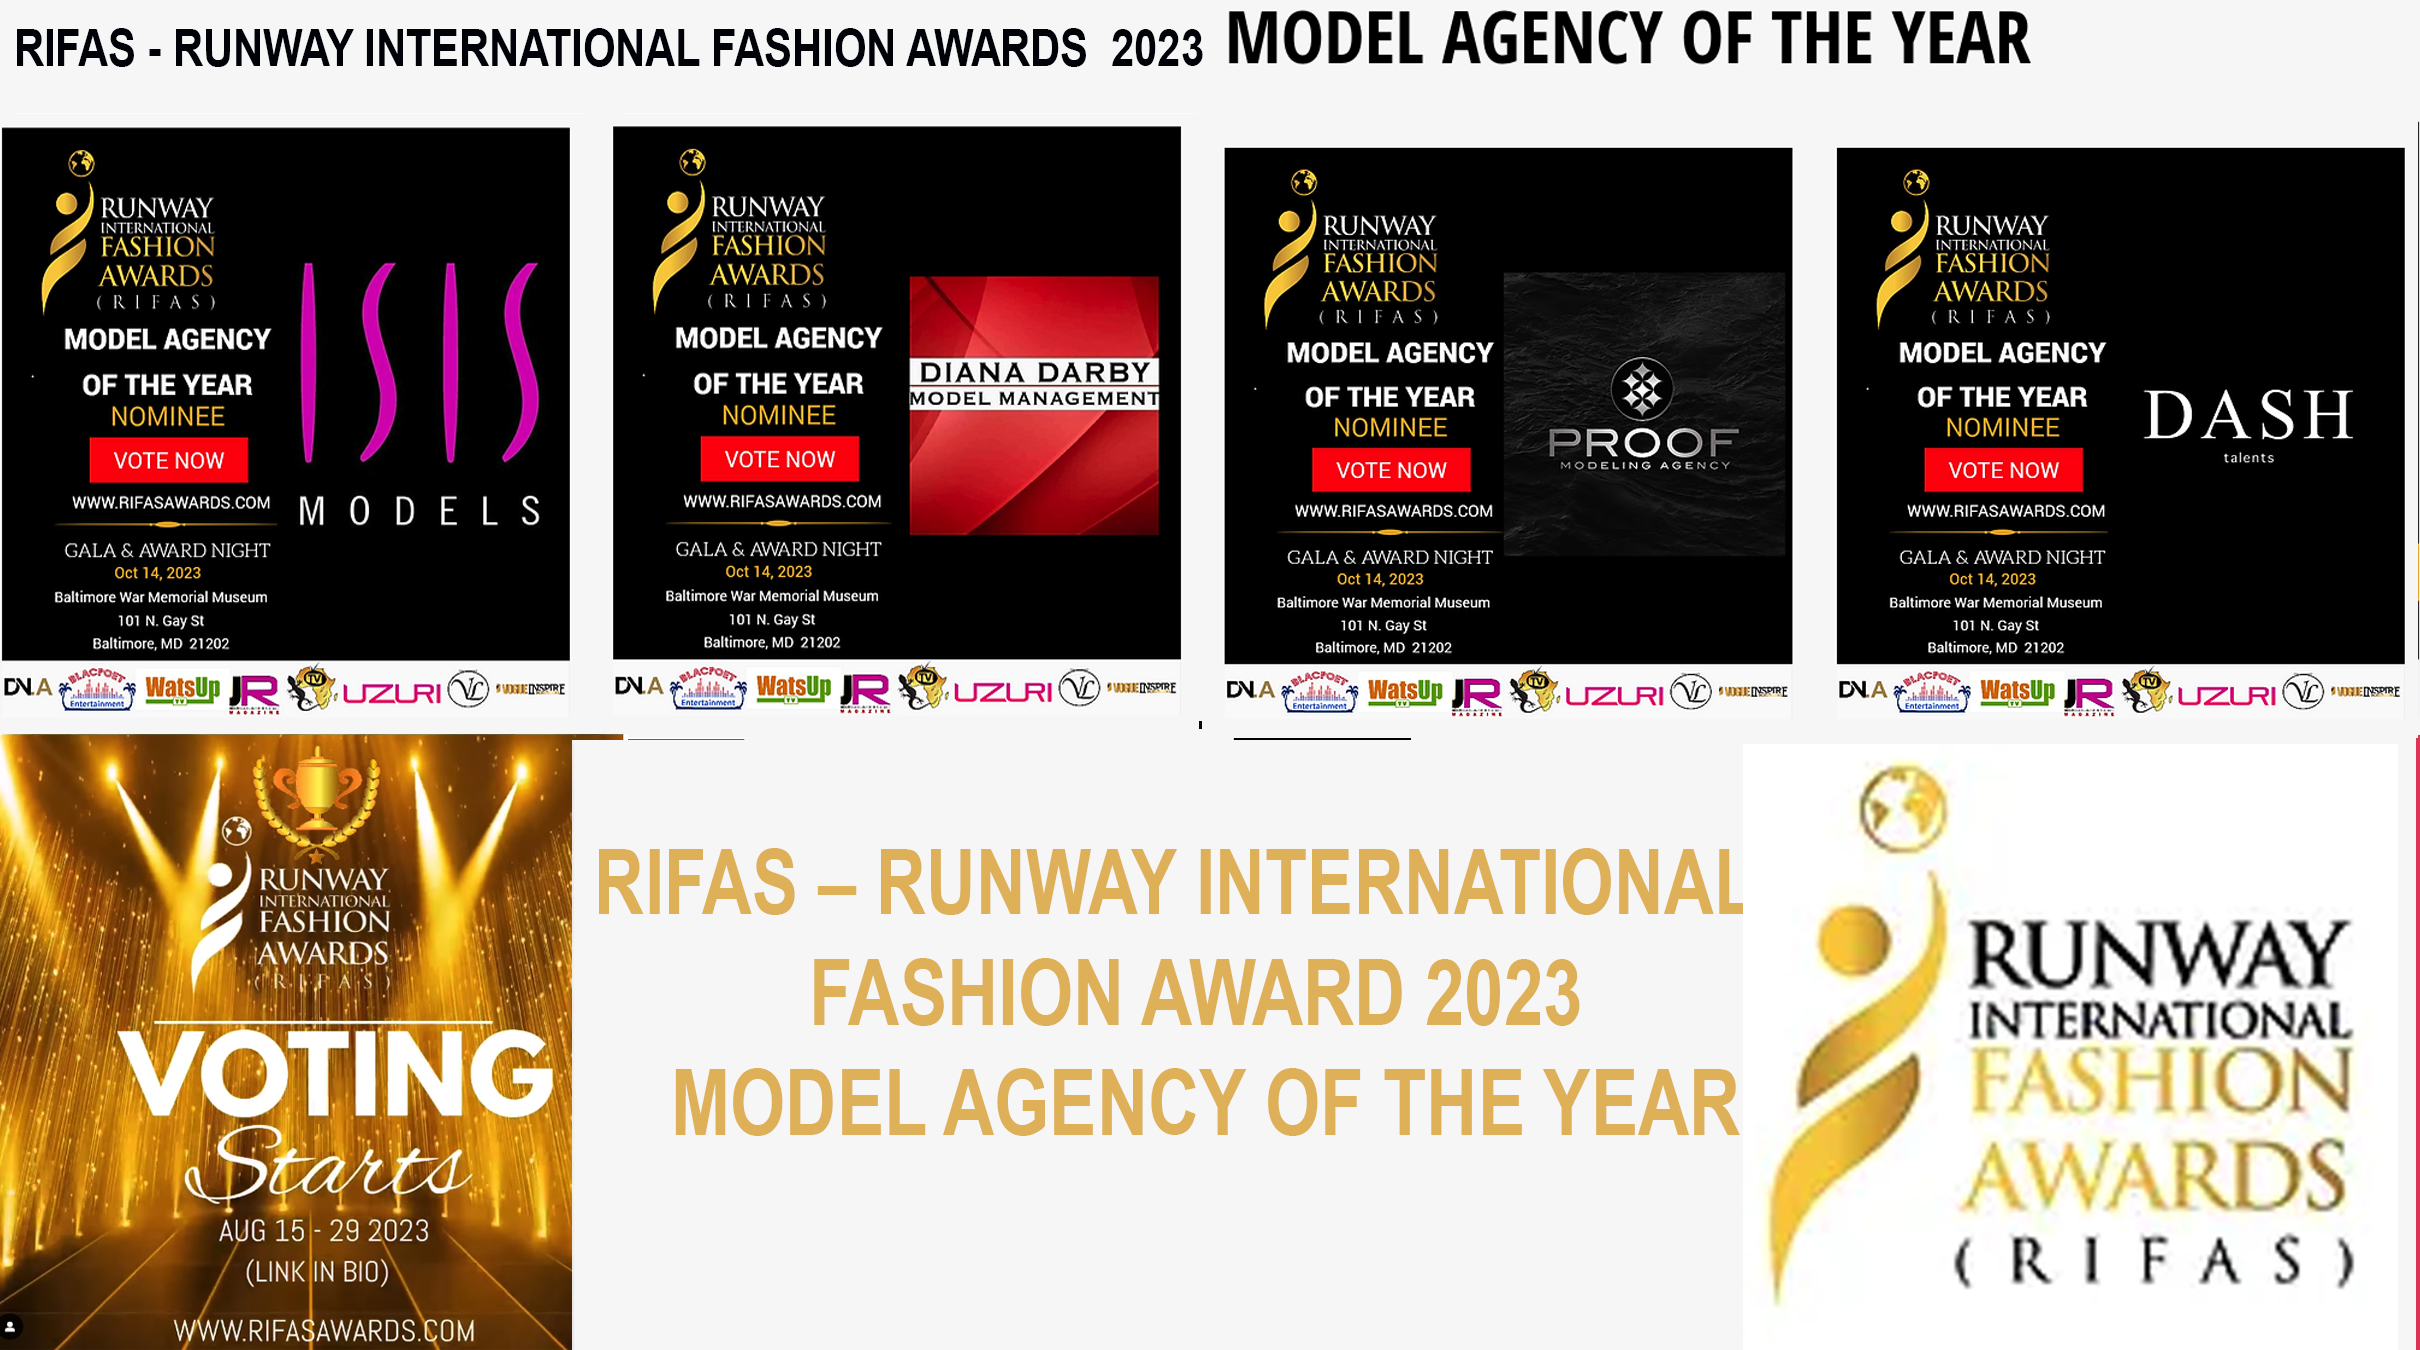 AFRICA-VOGUE-COVER-RIFAS-RUNWAY-INTERNATIONALL-FASHION-AWARD-2023-MODEL-AGENCY-OF-THE-YEAR-DN-AFRICA-MEDIA-PARTNER